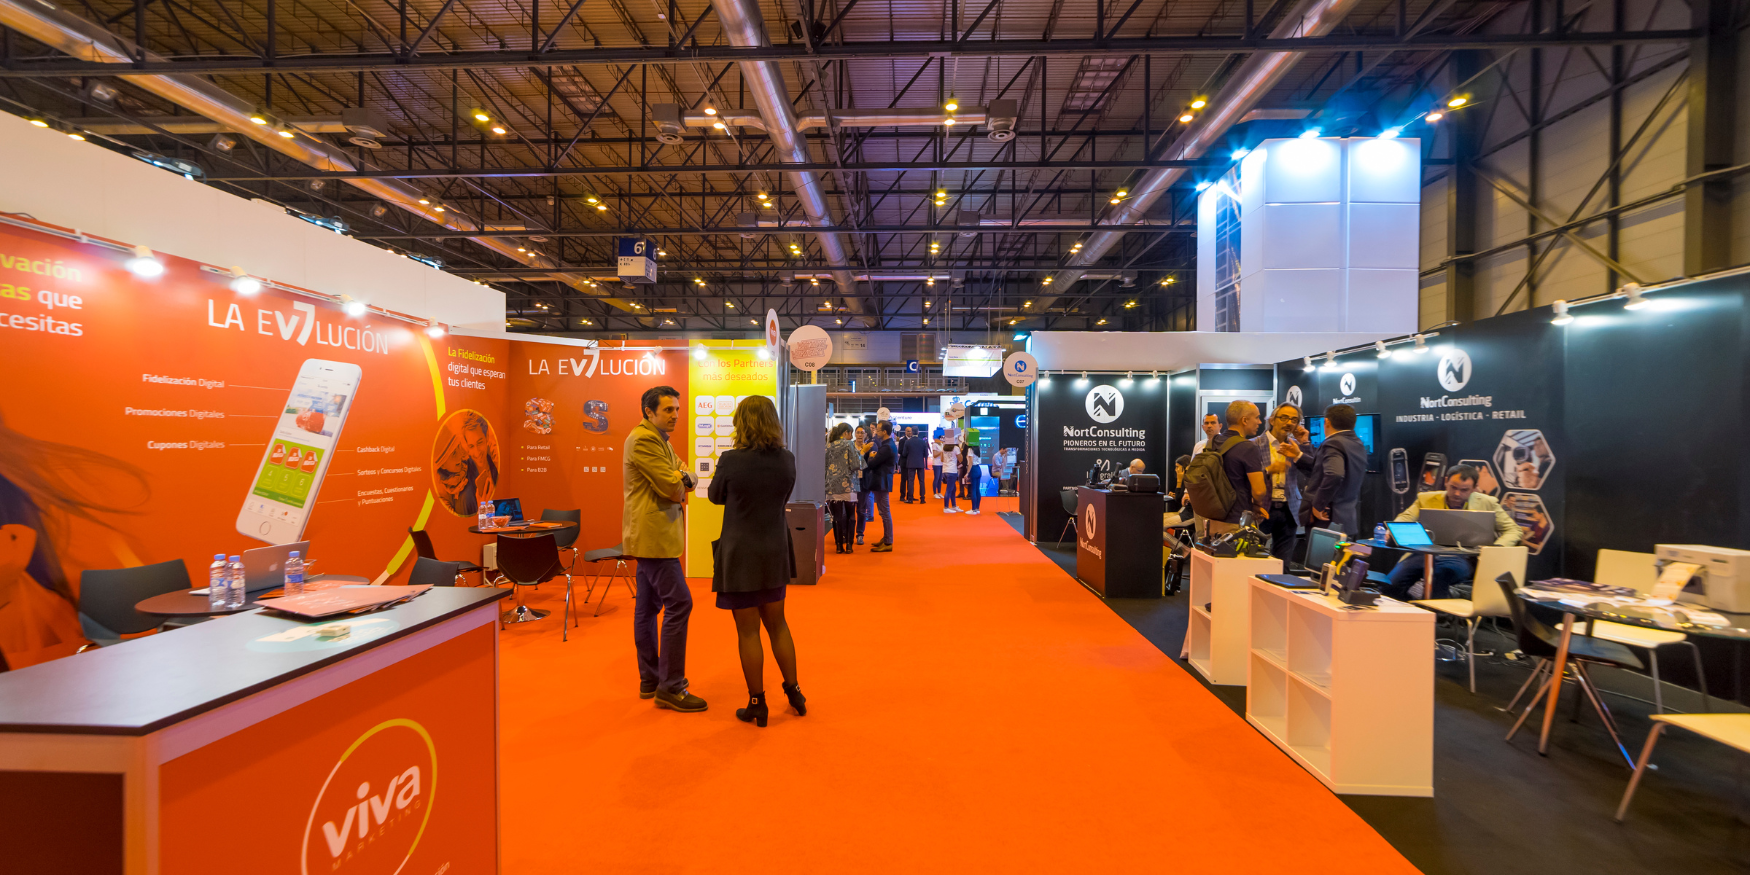 Stand Out with Creative Trade Show Booth Designs